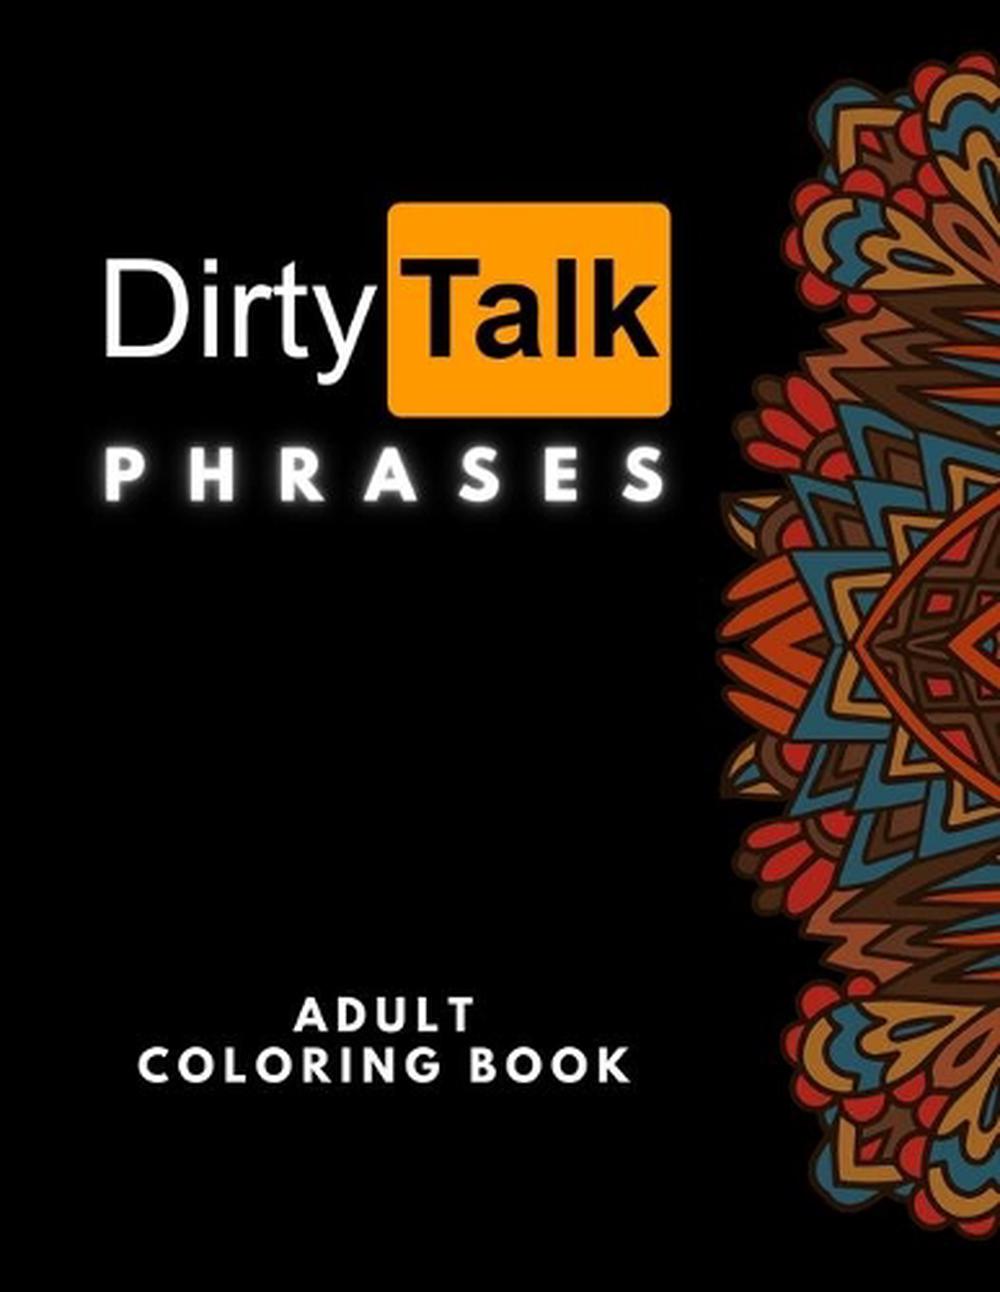 Download Dirty Talk Phrases Adult Coloring Book By Very Dirty Talk Publishers Paperback 9798706800901 Buy Online At Moby The Great